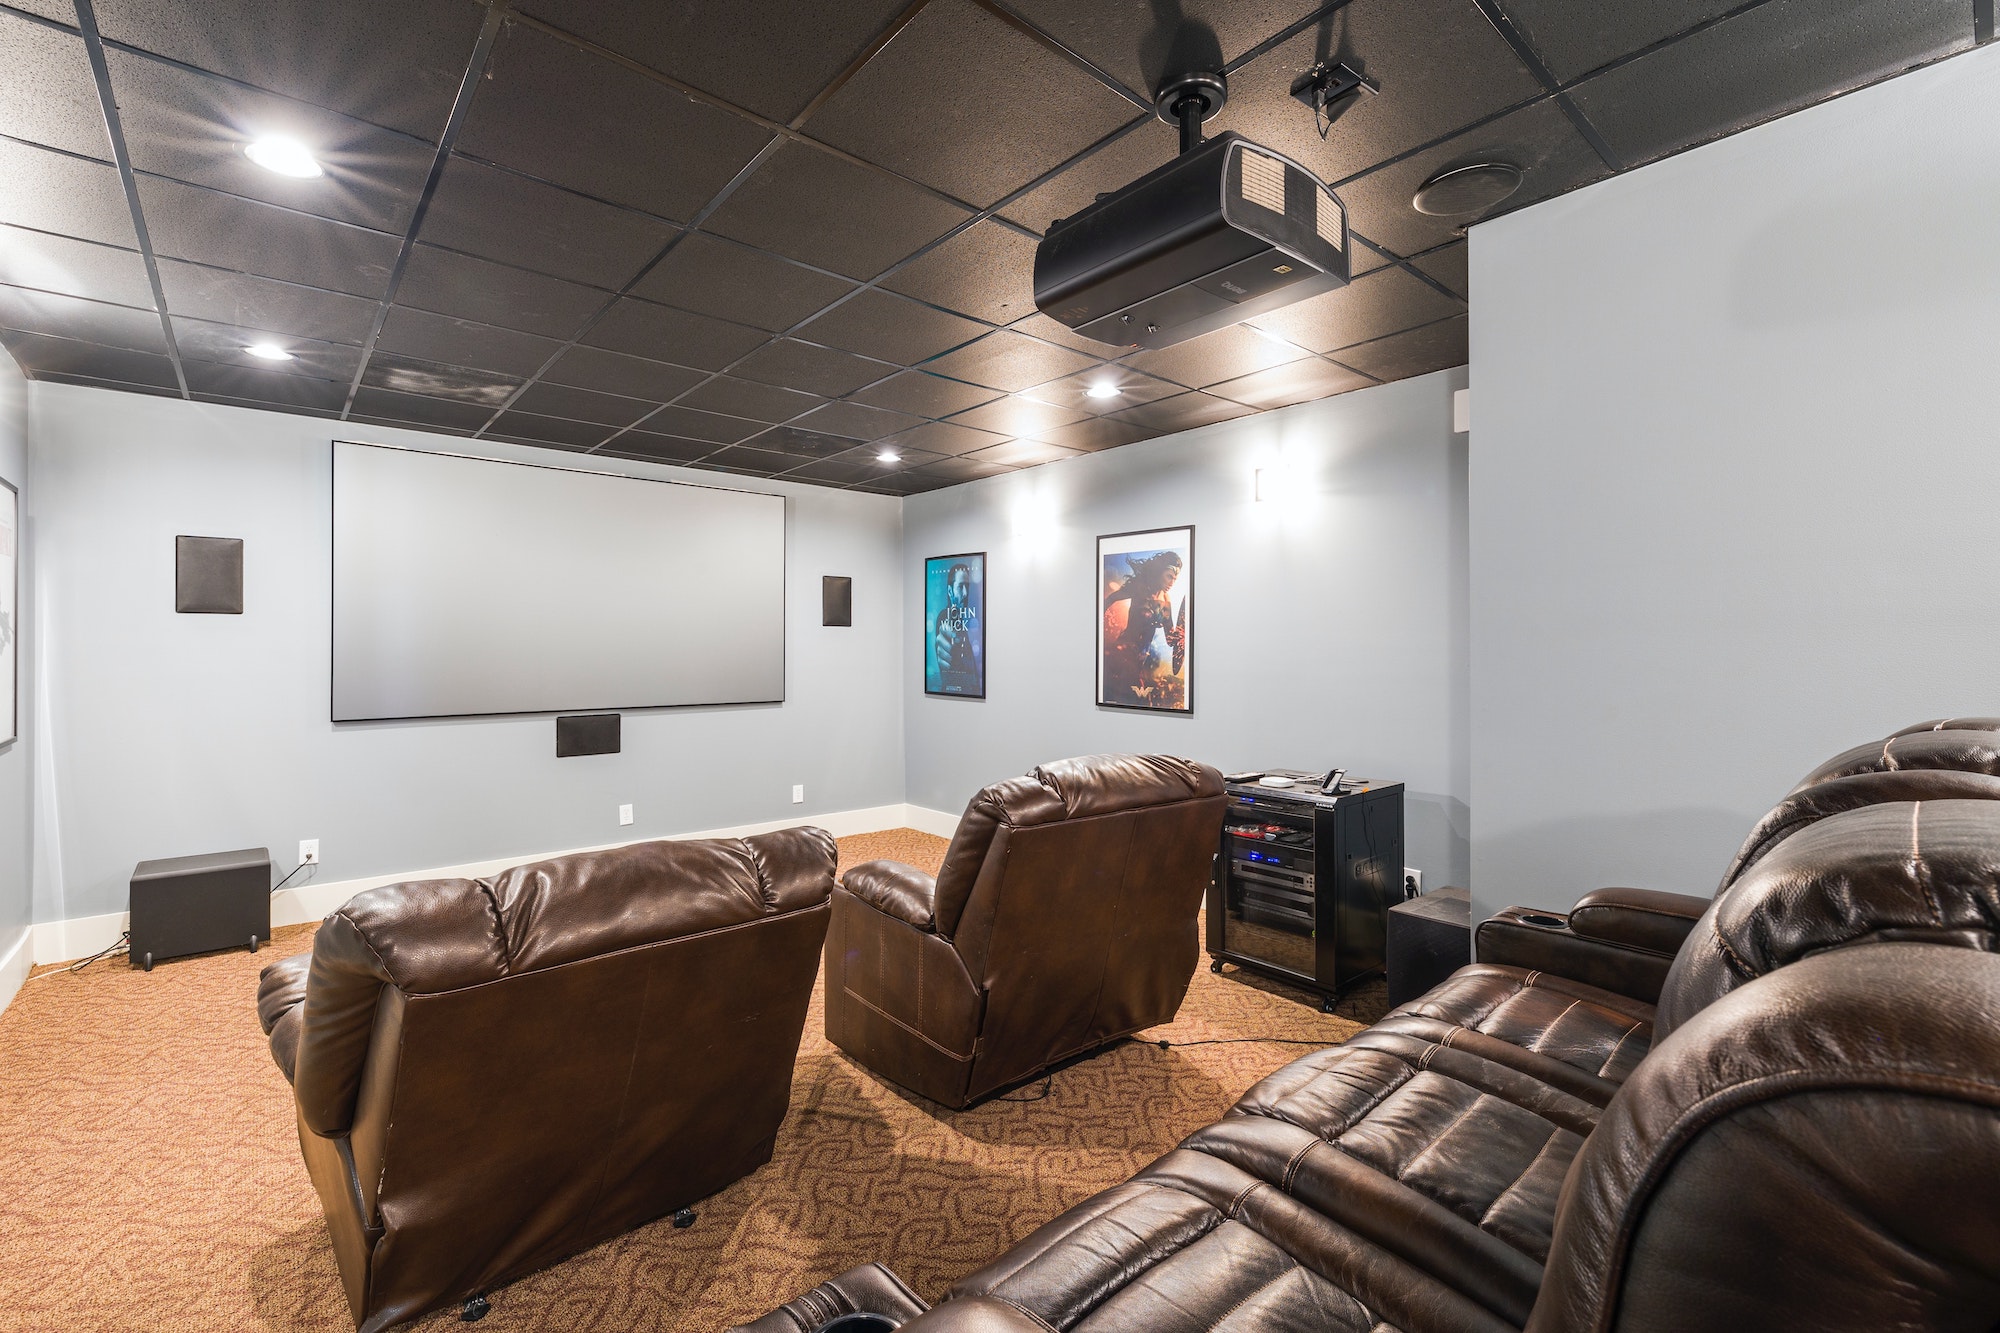 Home Theatre Ideas That Are Just WOW